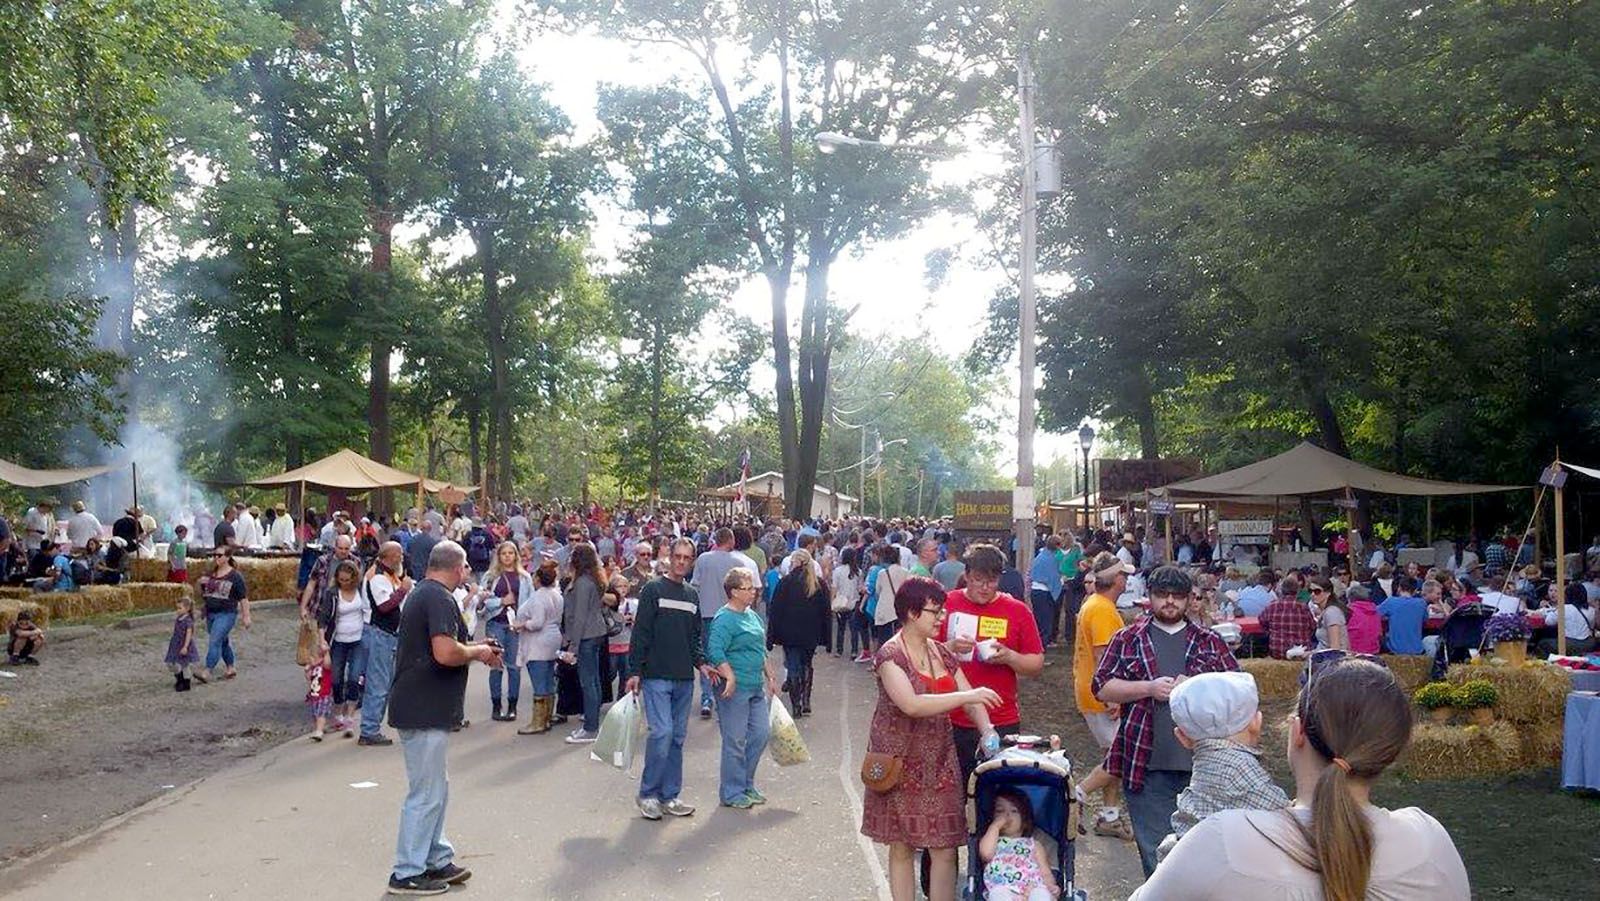 Join the crowd at the Johnny Appleseed Festival on Sept. 17-18.